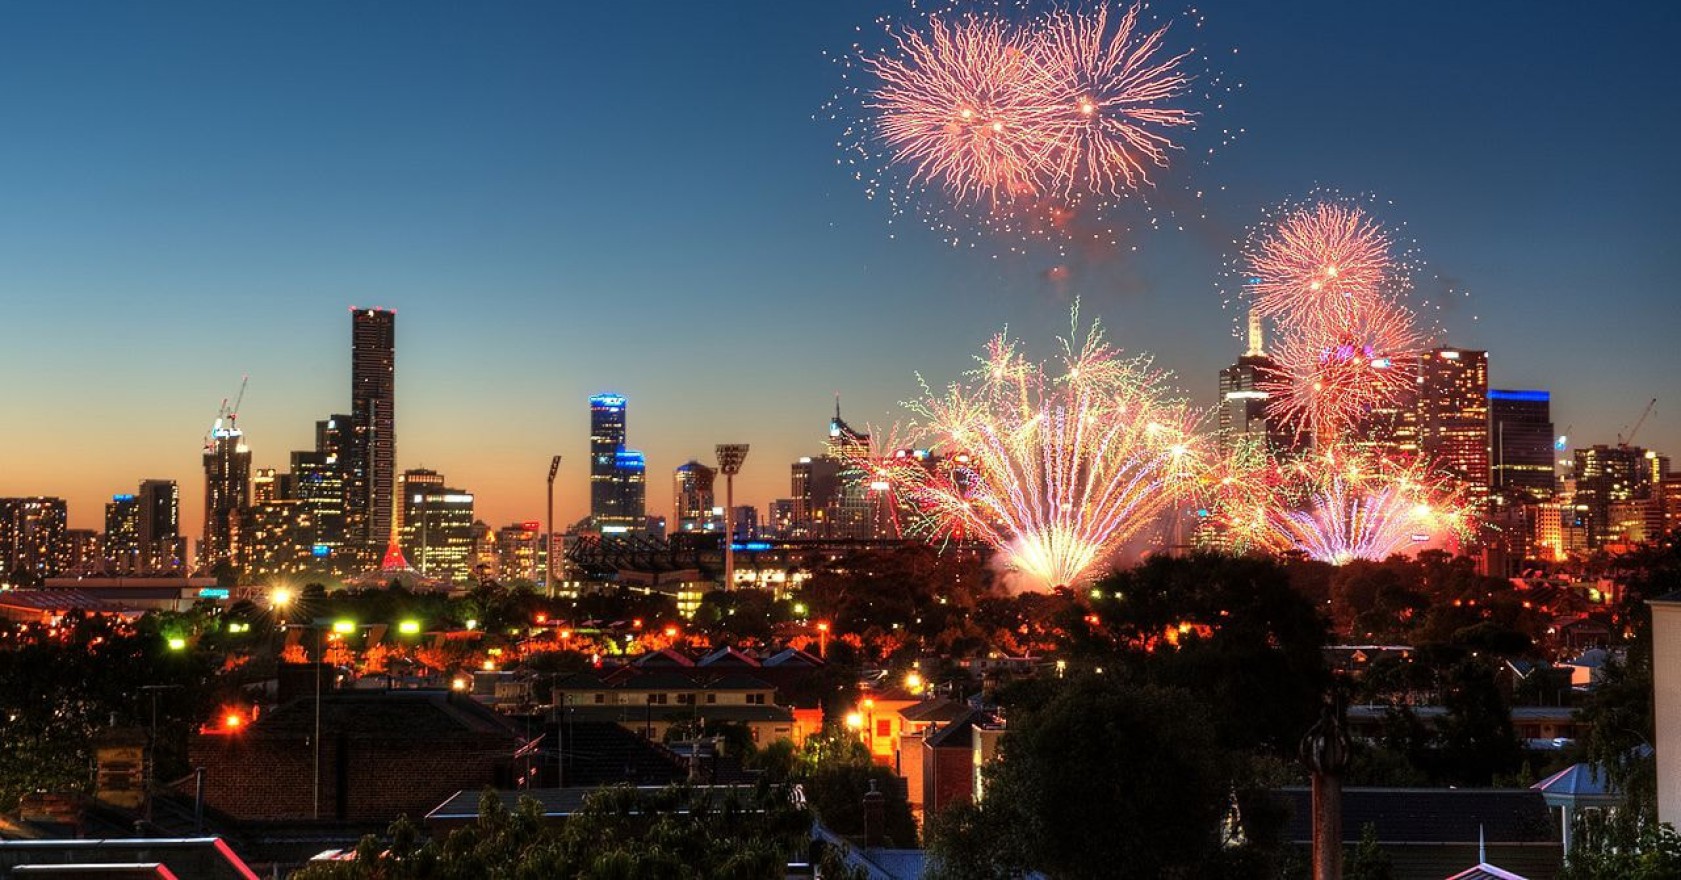 Melbourne’s New Years fireworks